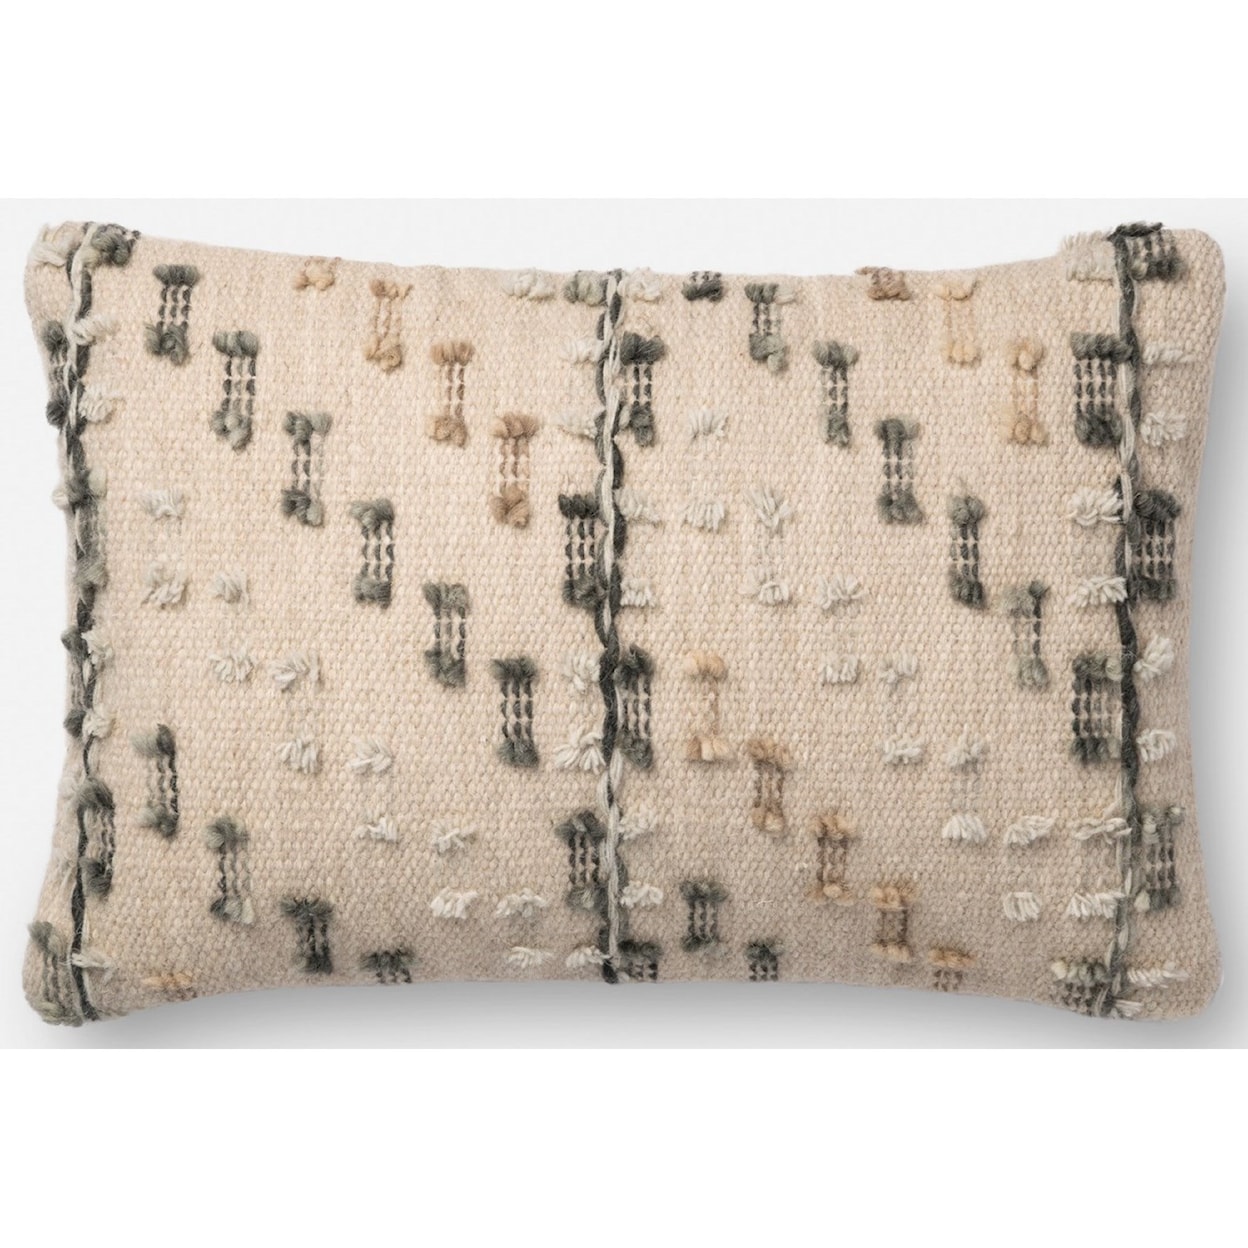 Magnolia Home by Joanna Gaines for Loloi Accent Pillows 13" x 21" Polyester Pillow